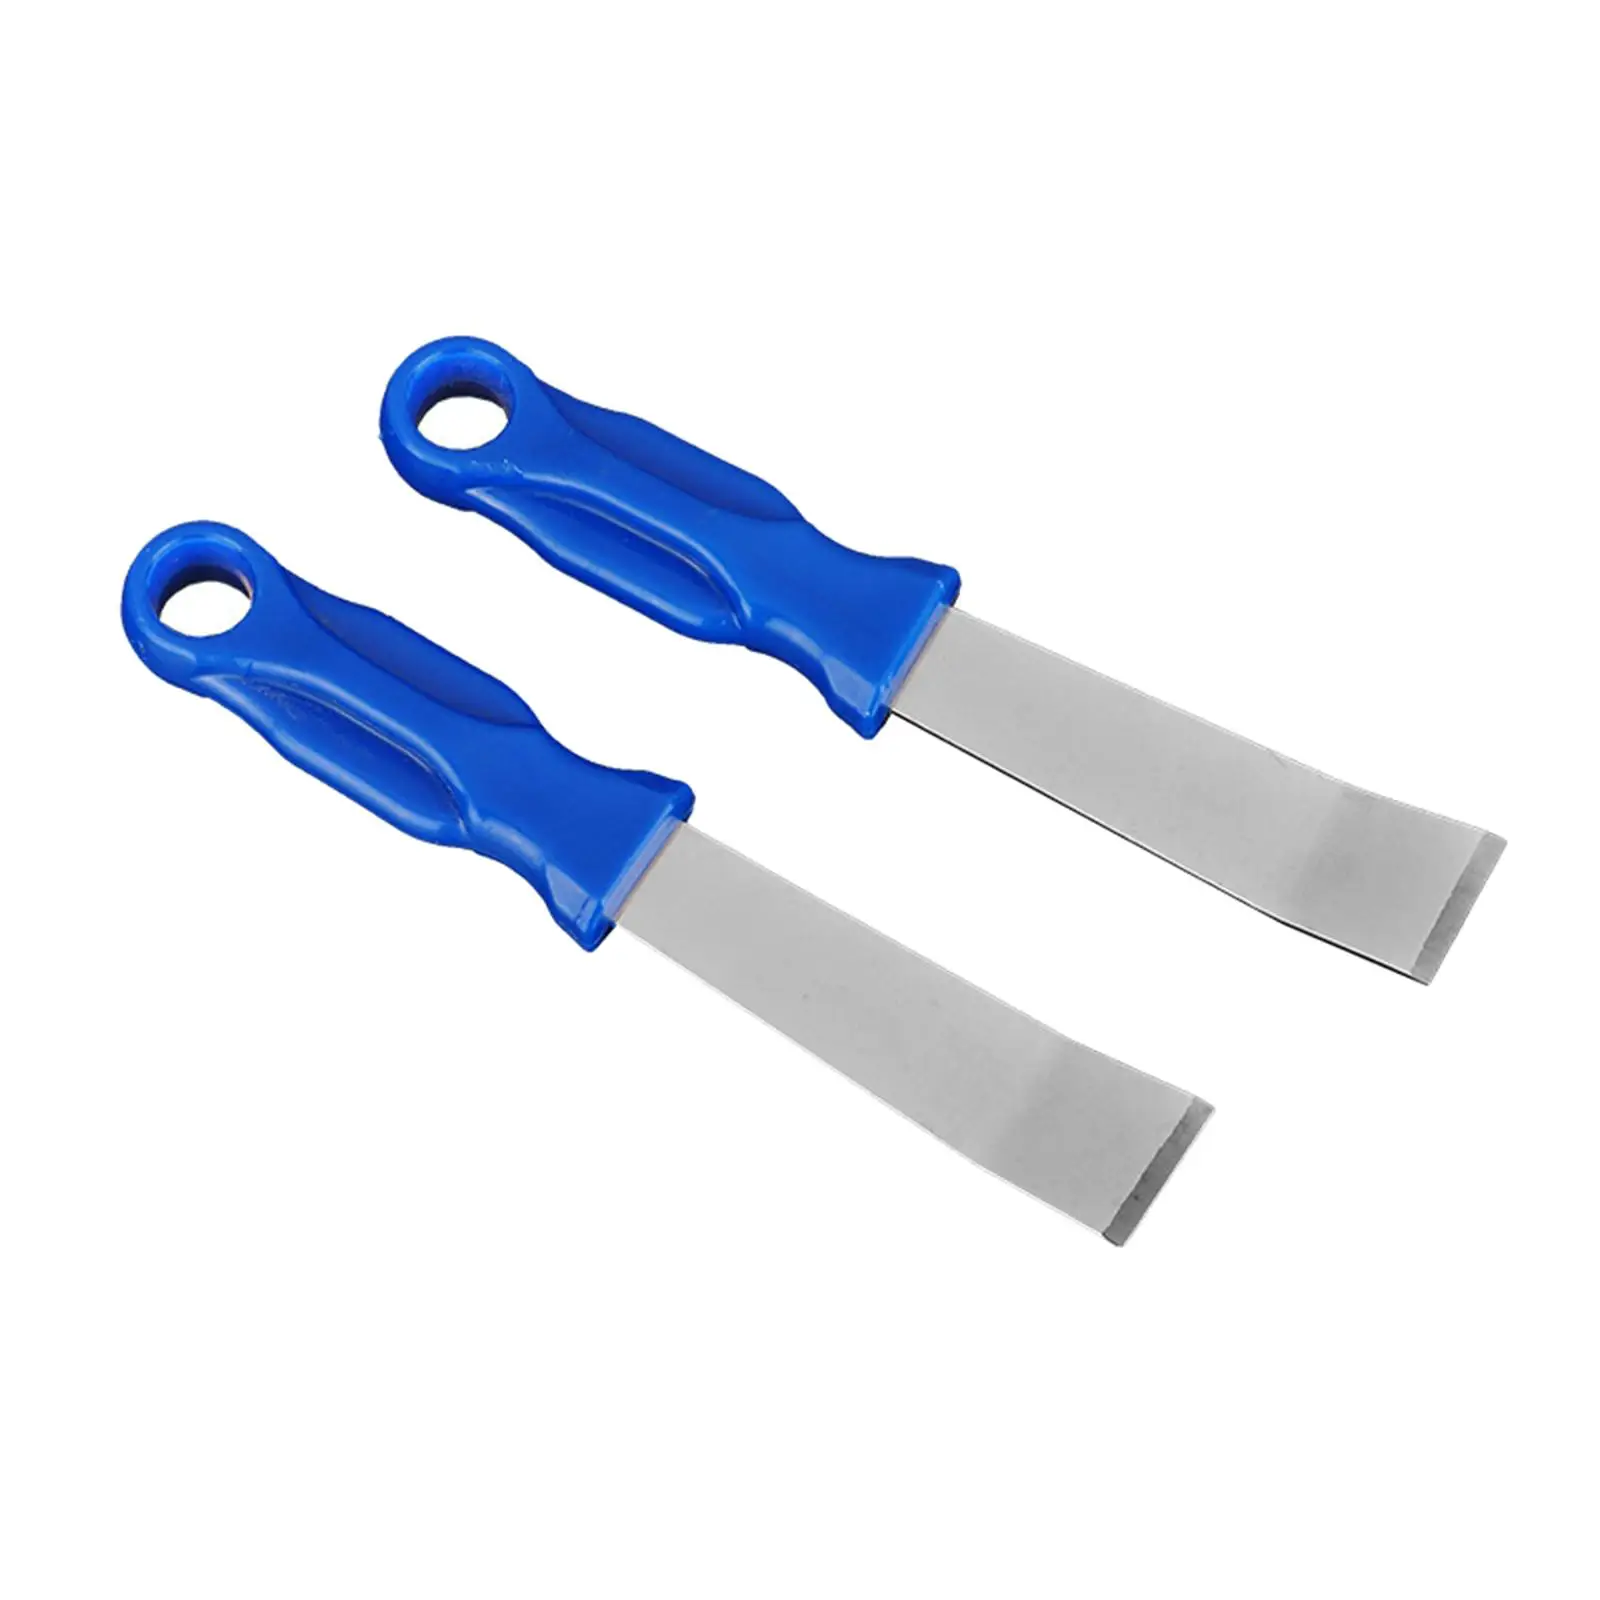 2 Pieces Durian Opener Glue Removal Tool for Restaurant Grocery Camping